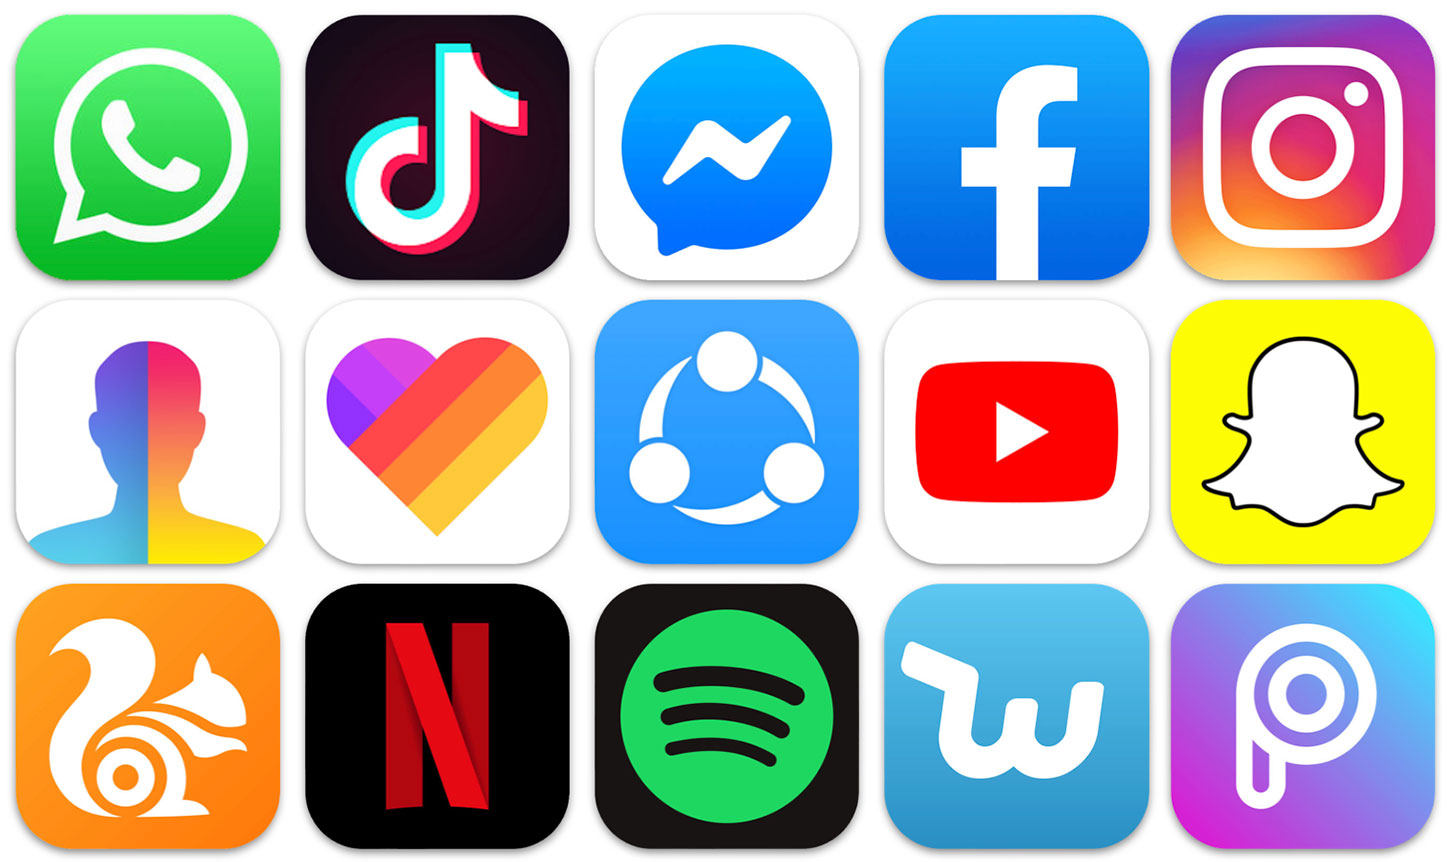 Top Apps Worldwide for Q3 2019 by Downloads